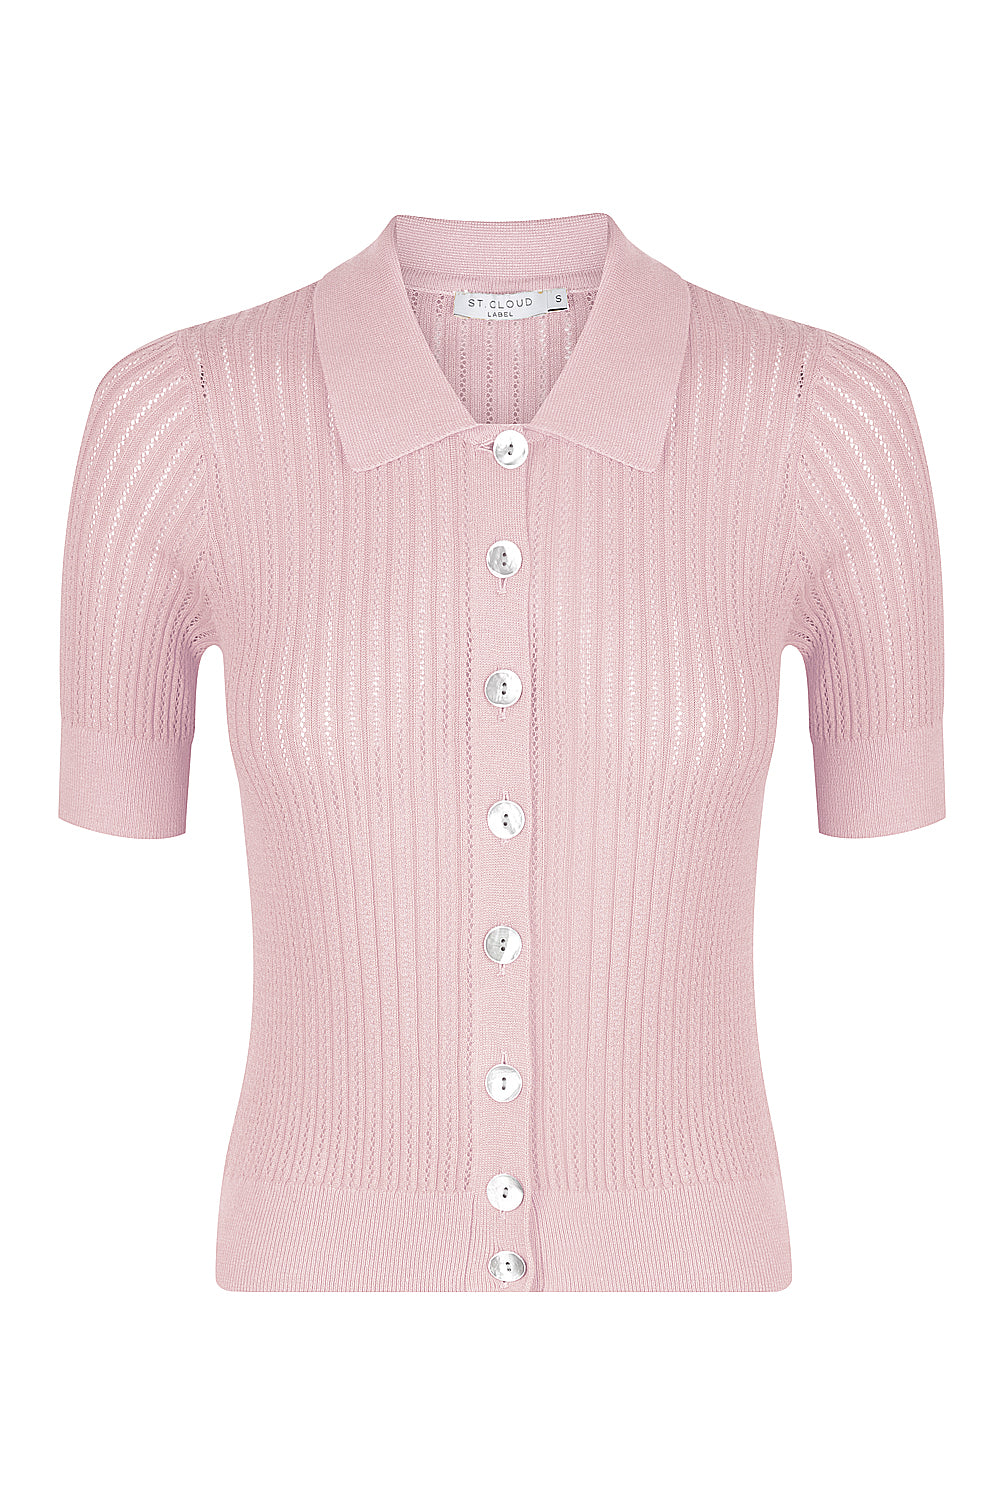 Down the Rabbit Hole Knit Polo Cardi - Marshmallow Pink